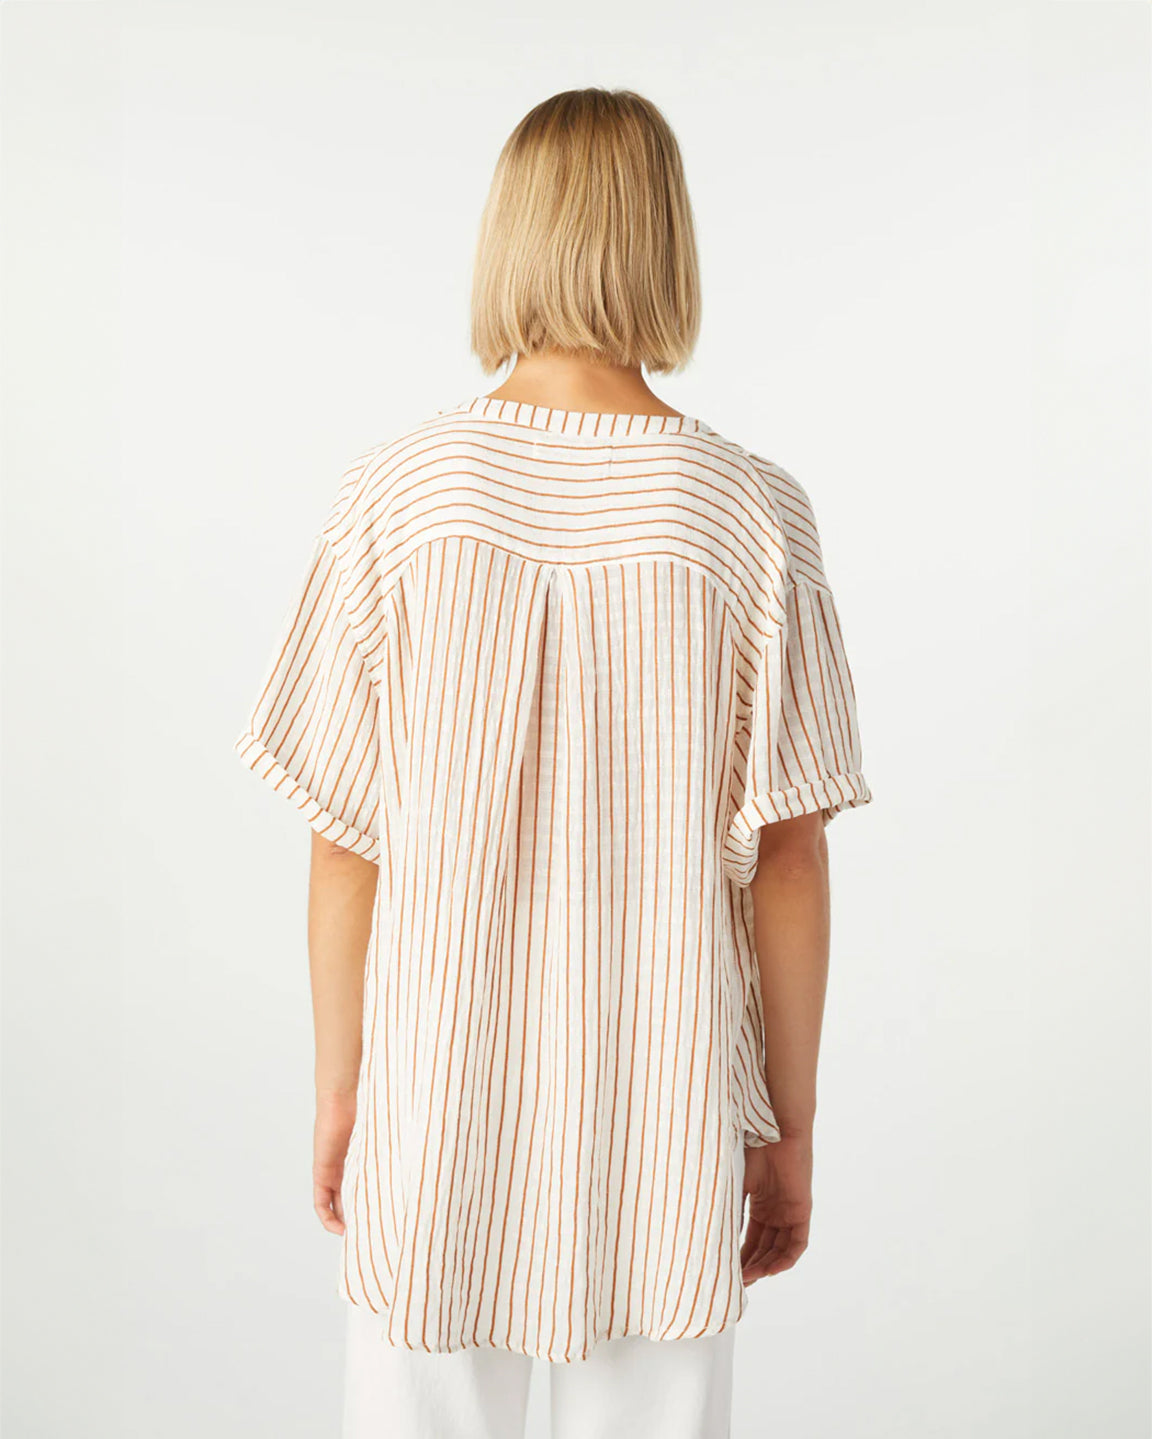 Amo Antoinette Shirt in Sepia and Natural